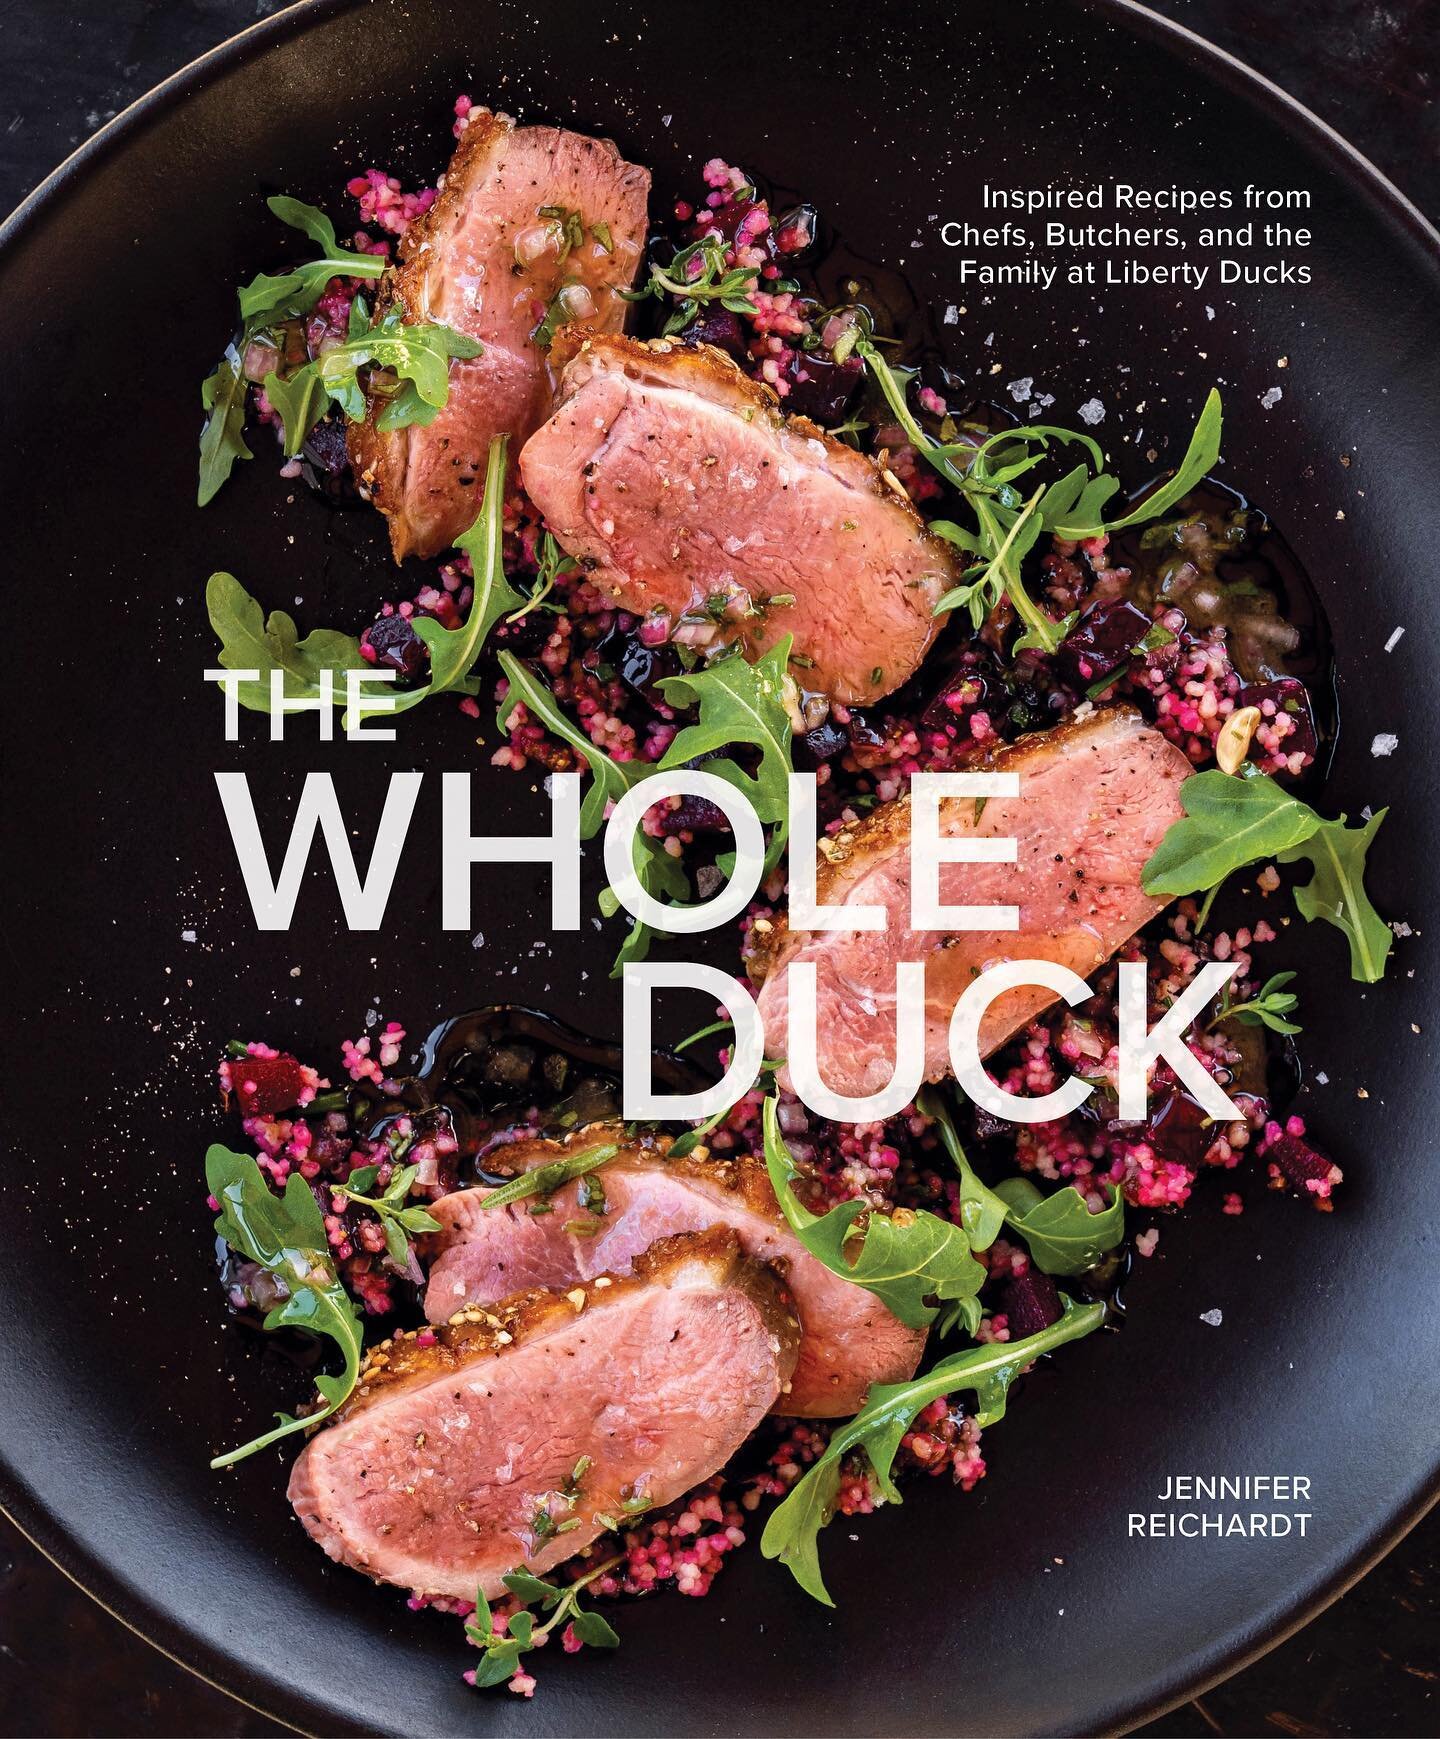 I&rsquo;ve been holding onto this not so secret little for months but the jig is UP!

The Whole Duck cookbook is a real, tangible thang and I can&rsquo;t help but filled with so much pride and excitement to share it all with you! 

My longtime friend